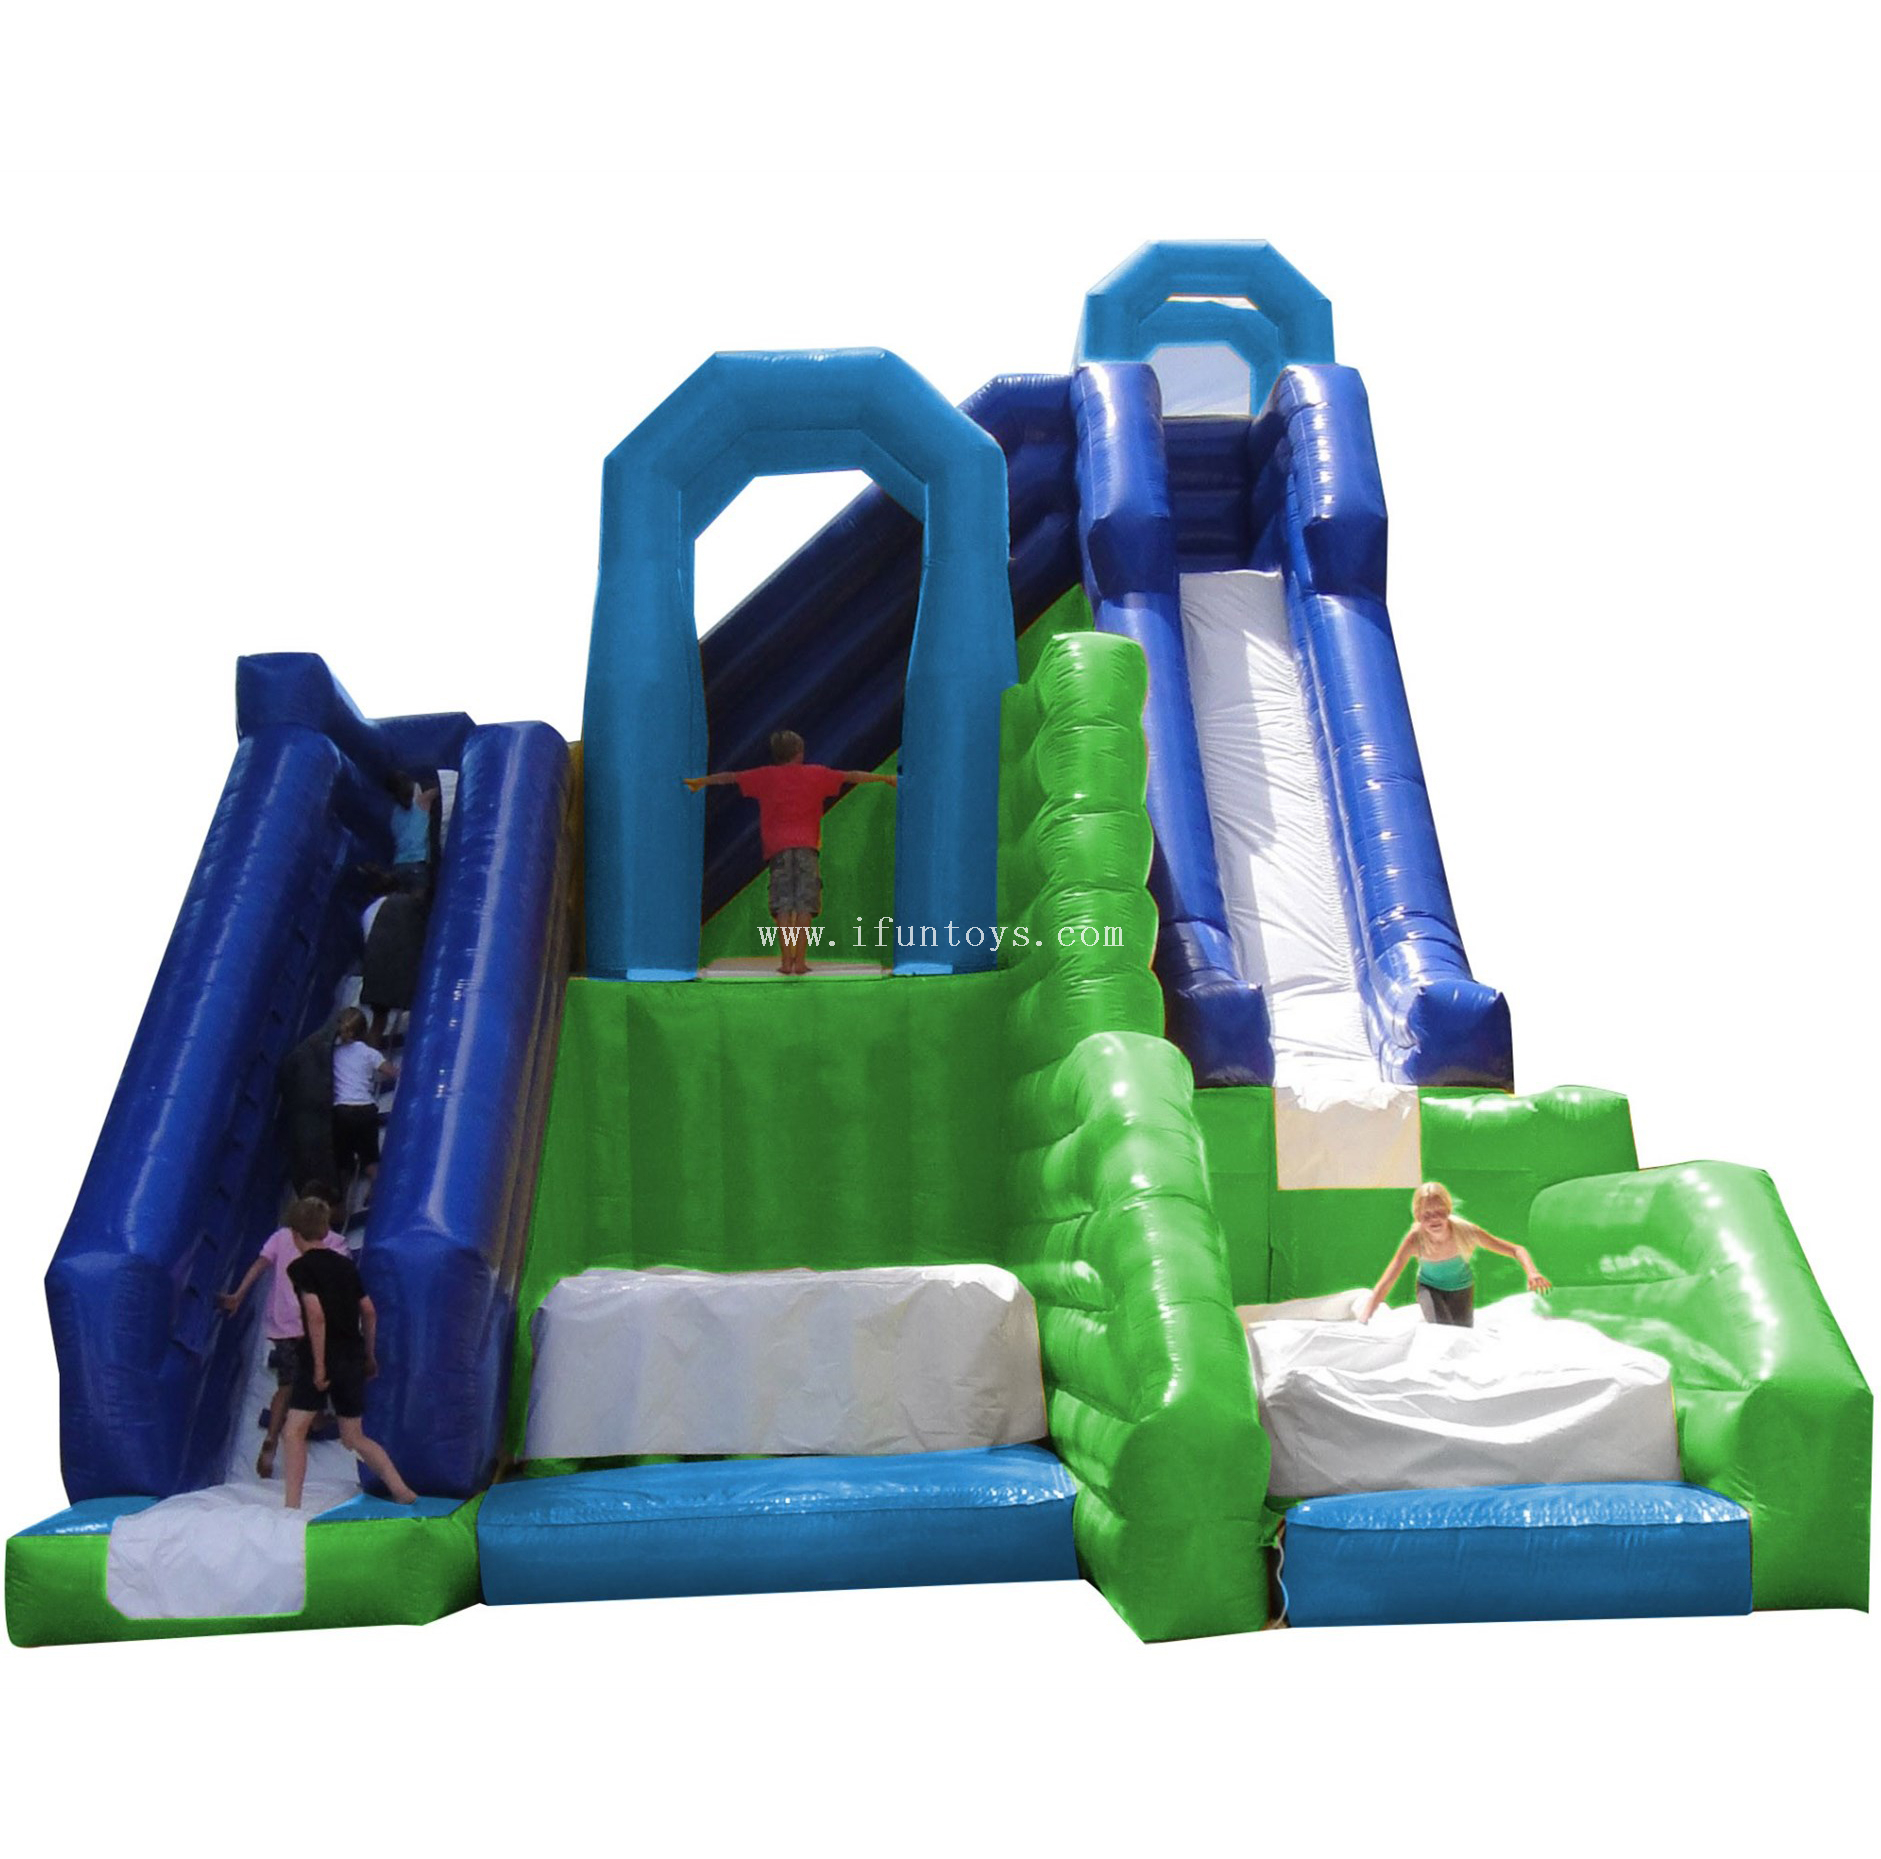 Outdoor Inflatable combo cliff jump slide/inflatable dry slide/ inflatable ladder slide bounce for kids and adults